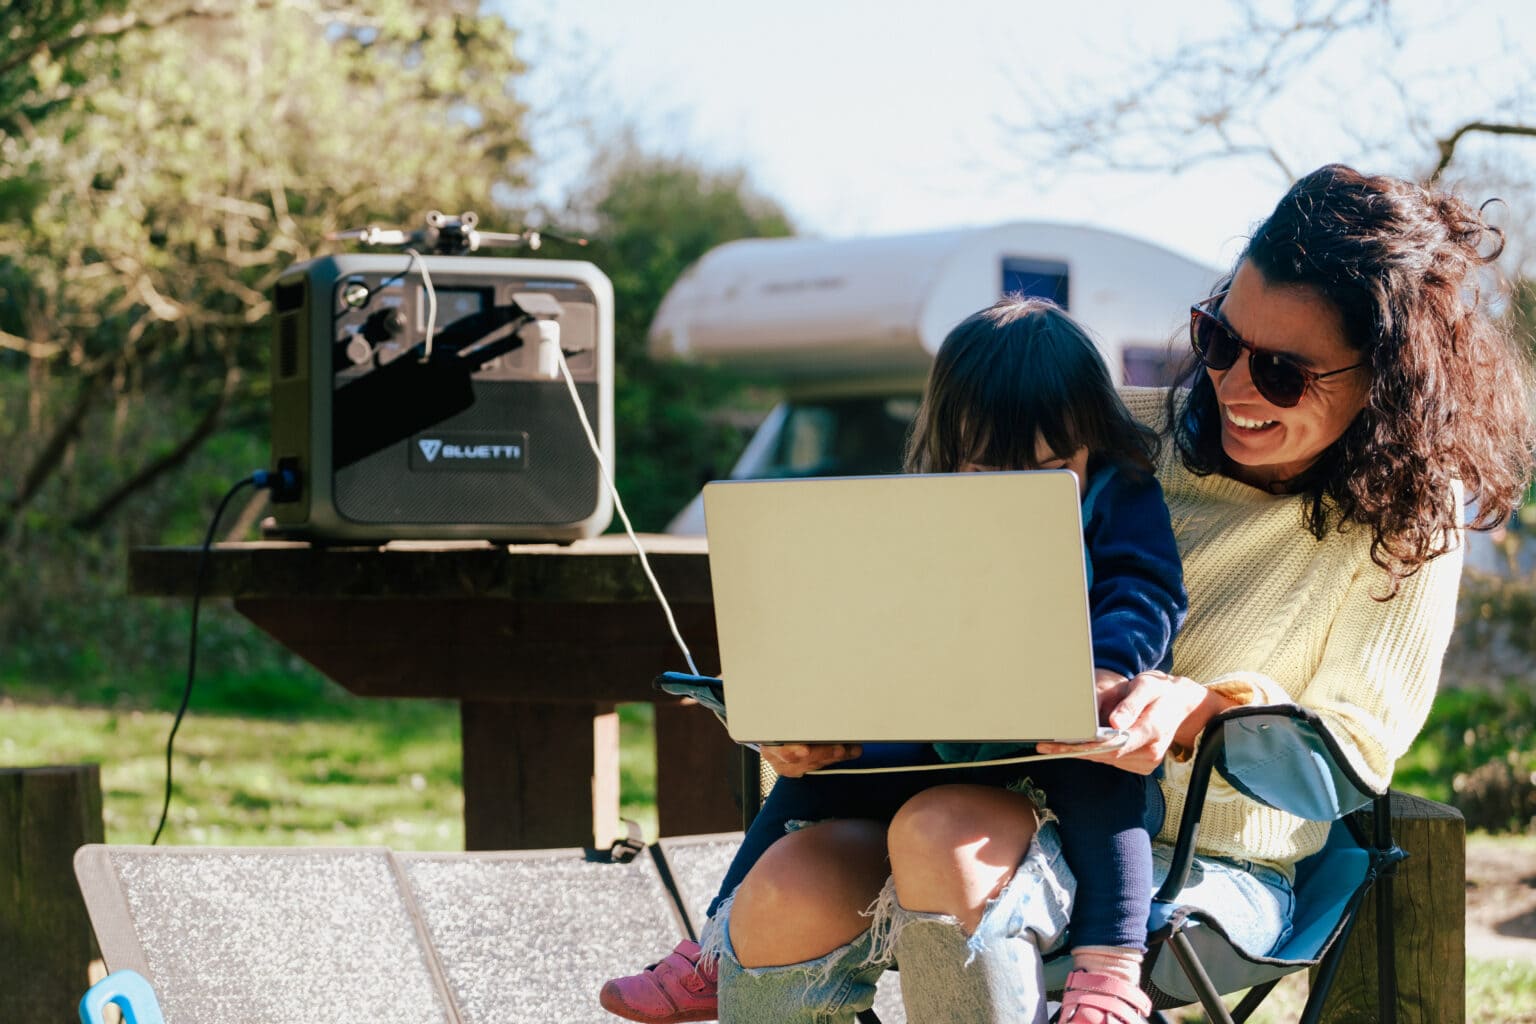 Trust us, mom will be grateful for the laptop charging when you take her camping.